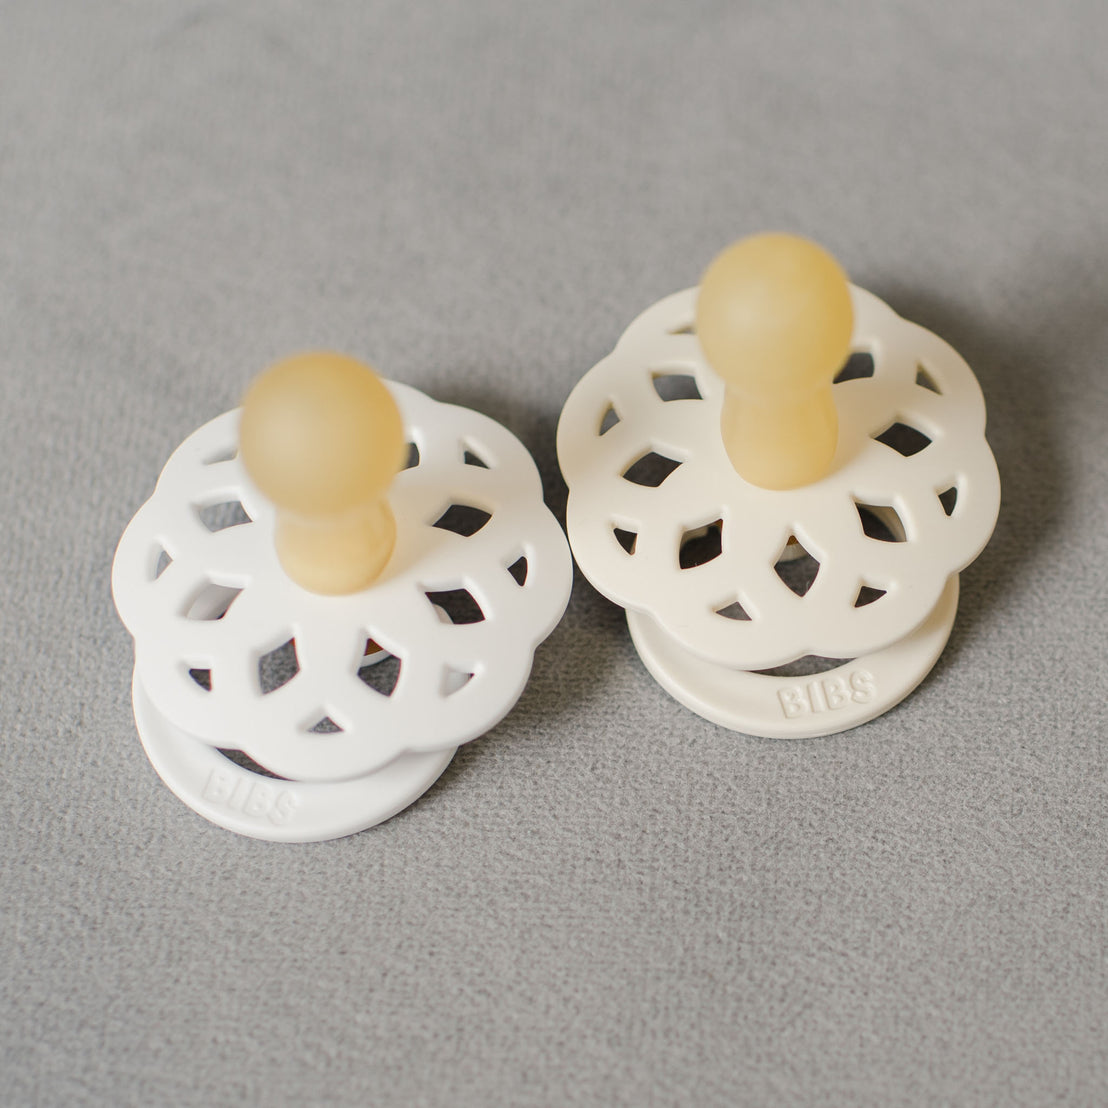 An Aria Pacifier Set in White & Ivory with round, cut-out shields, displayed on a grey textile surface.